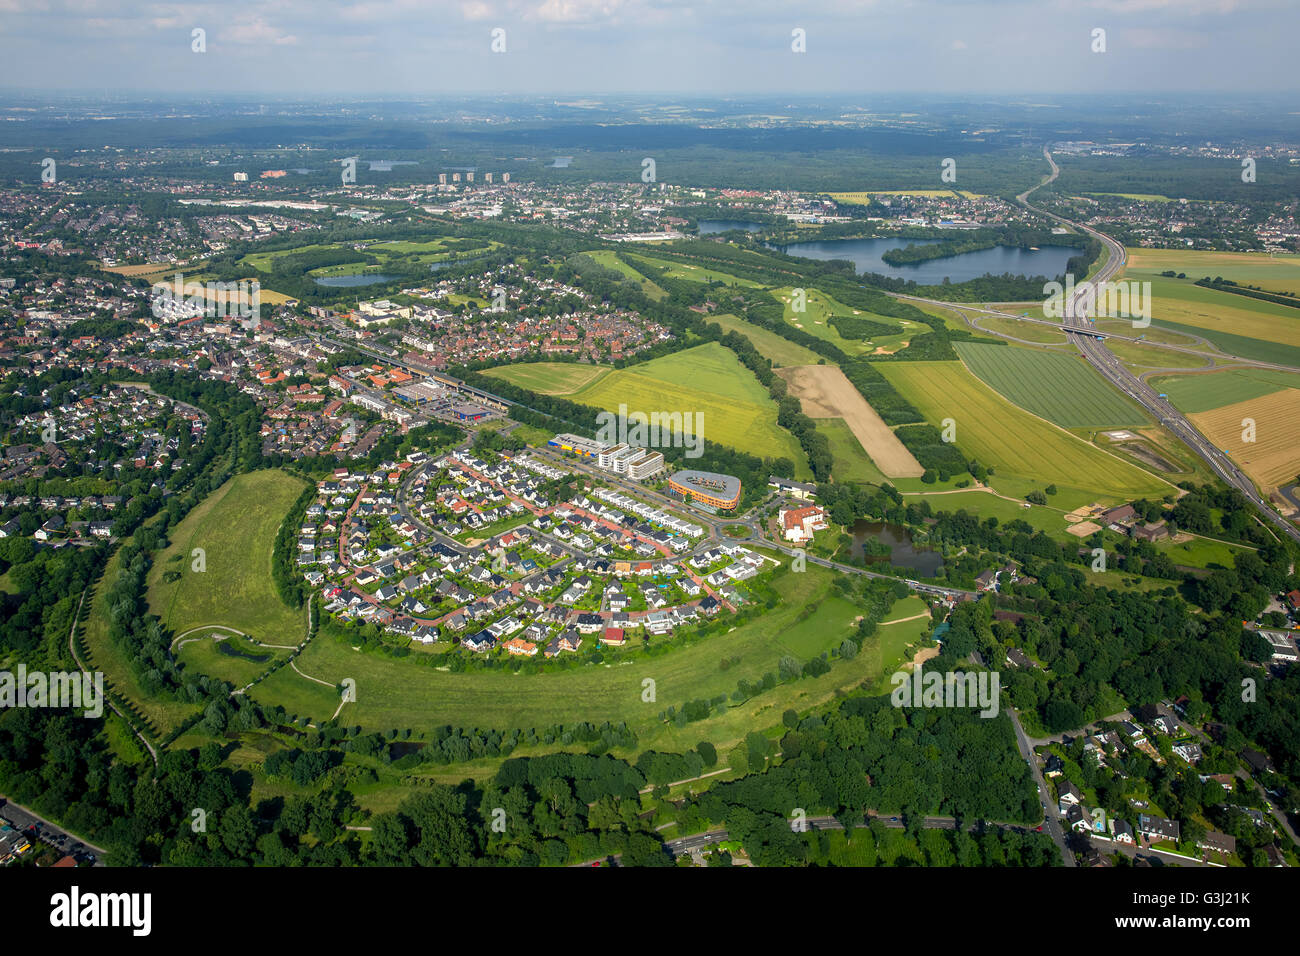 Aerial view, settlement Anger Arch at Angersbach in Huckingen, housing development built in the bow, Duisburg, Ruhr region, Stock Photo